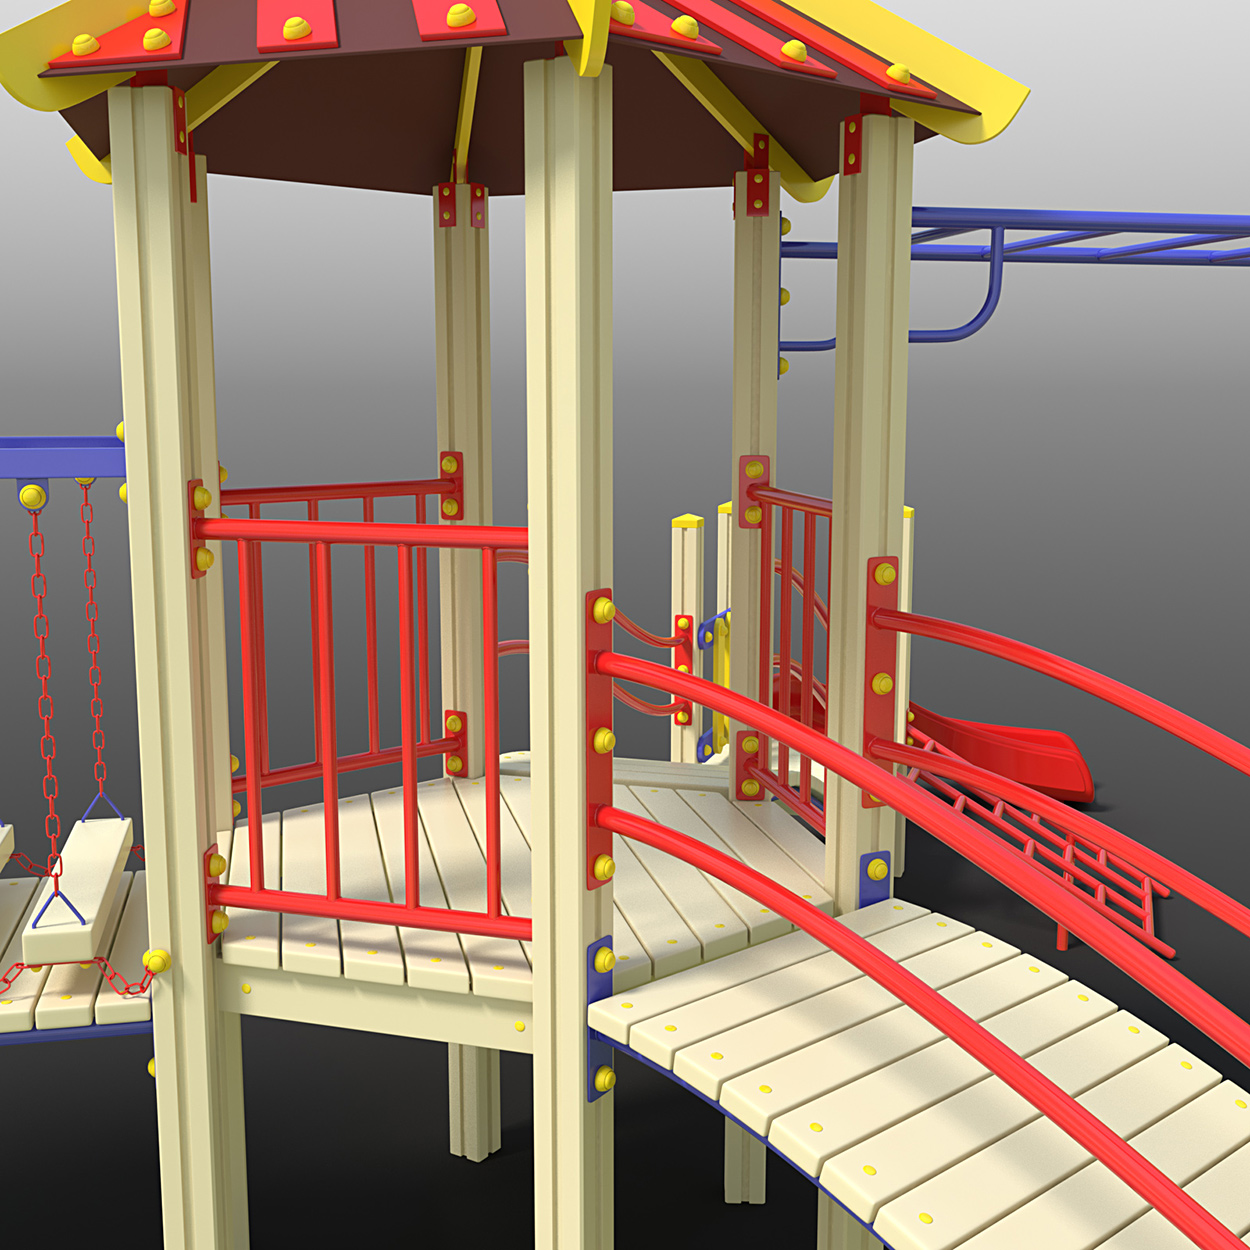 High quality 3D model of the Playground. 3D model for sale.